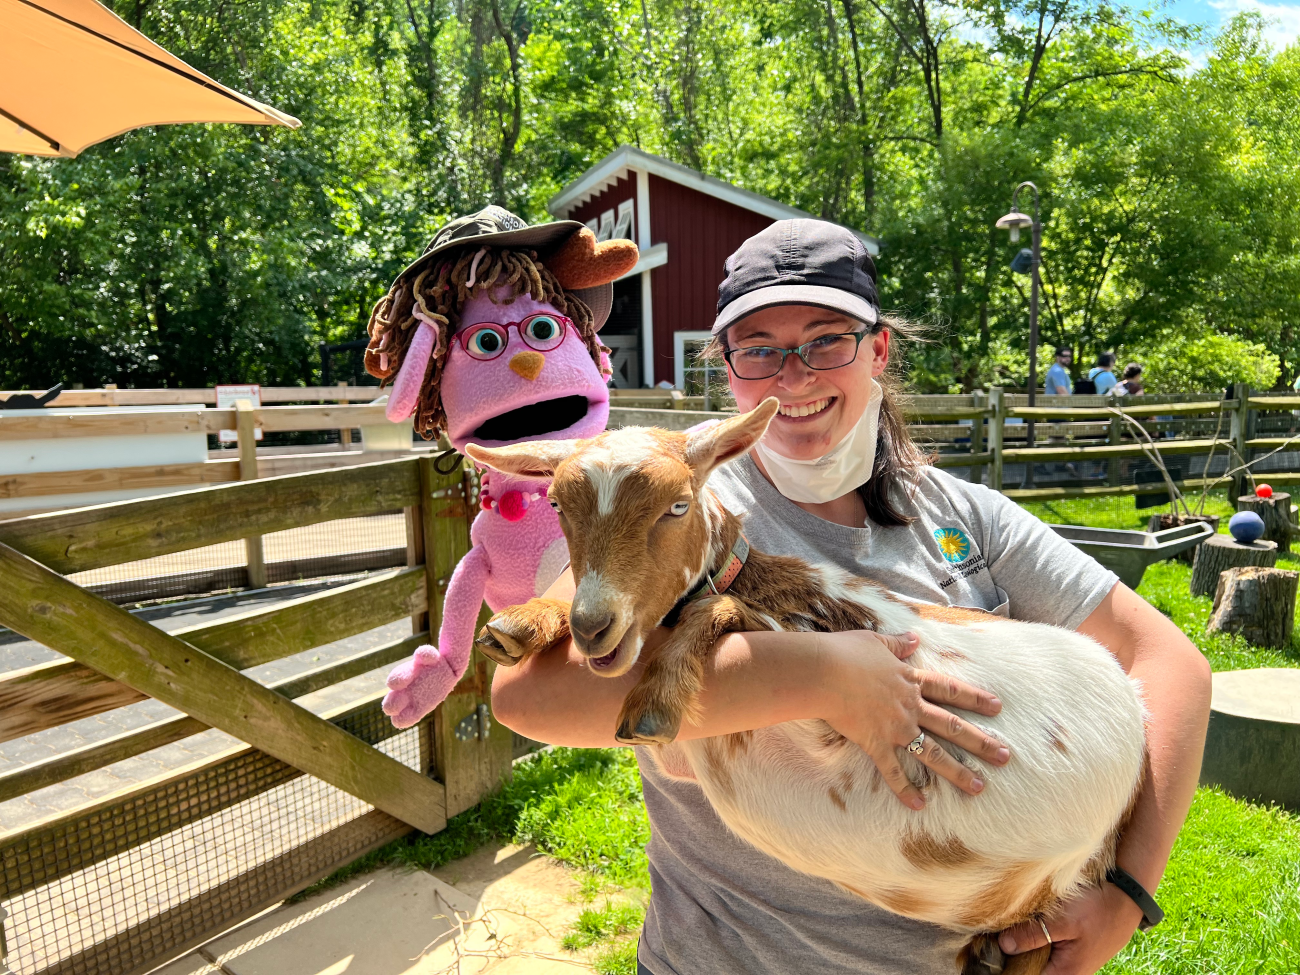 Zoo keeper Nikki stands while she holds brown and cream spotted Nigerian dwarf goat. Behind her left should a pink jackalope puppet smiles.